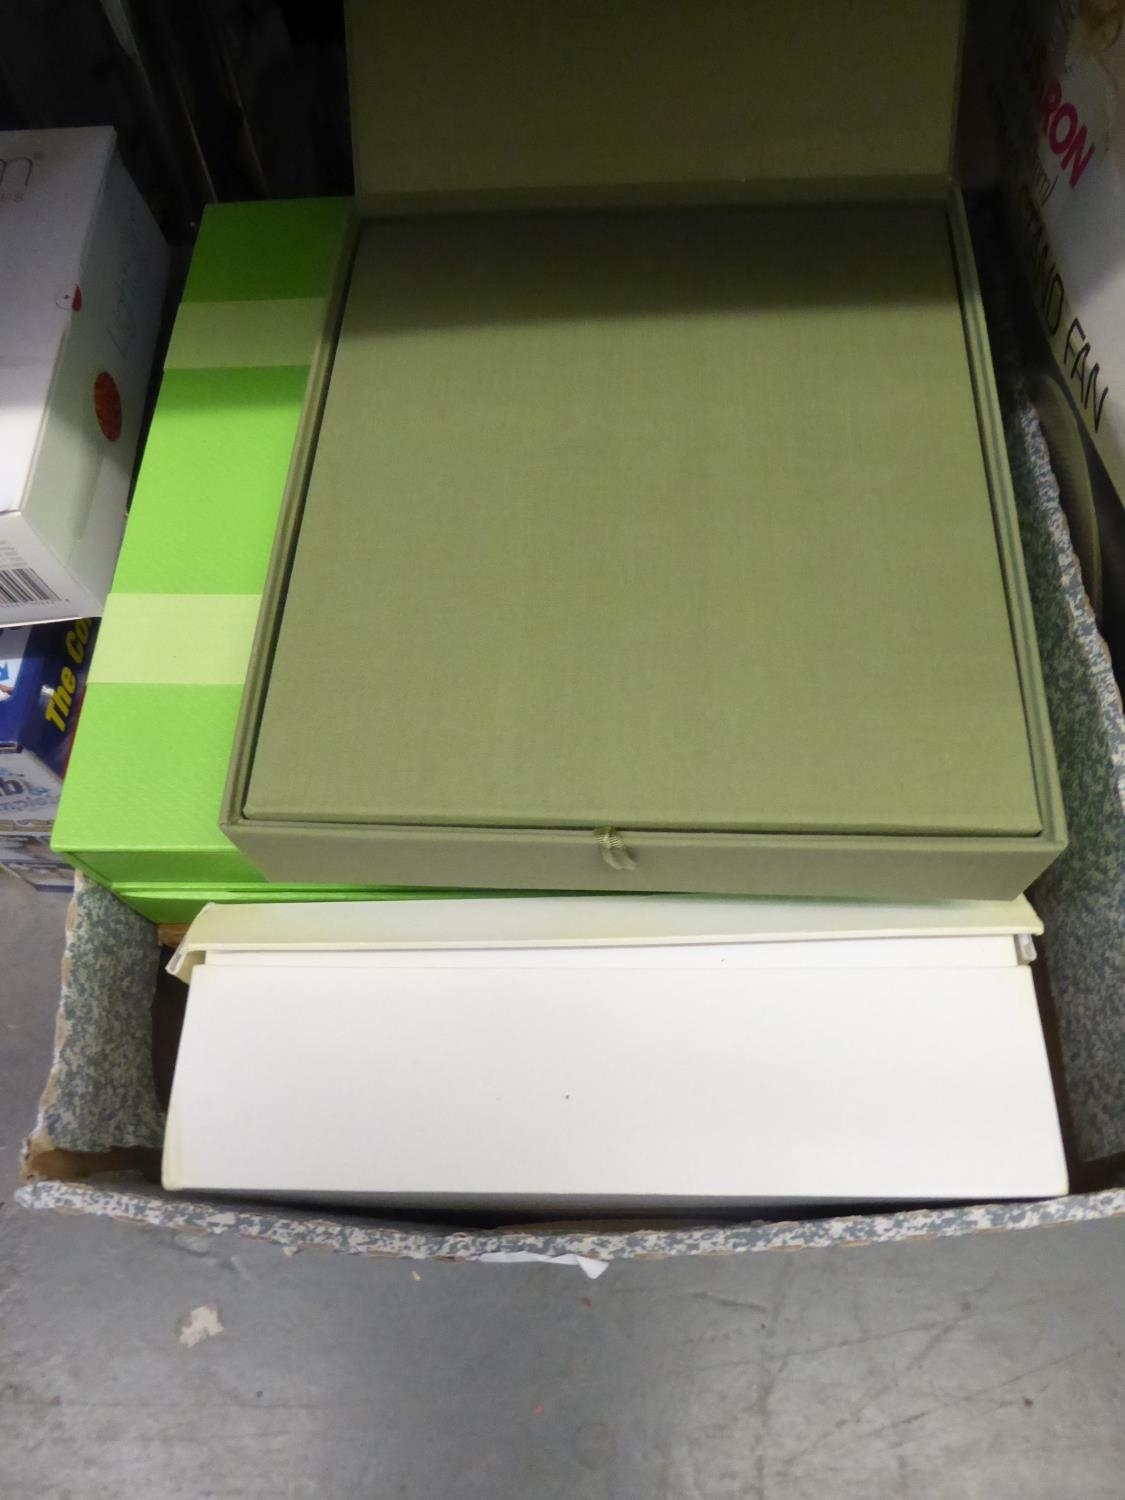 A GOOD SELECTION OF PAPER, ETC... (FOR CRAFTING AND CARD MAKING) (1 BOX)